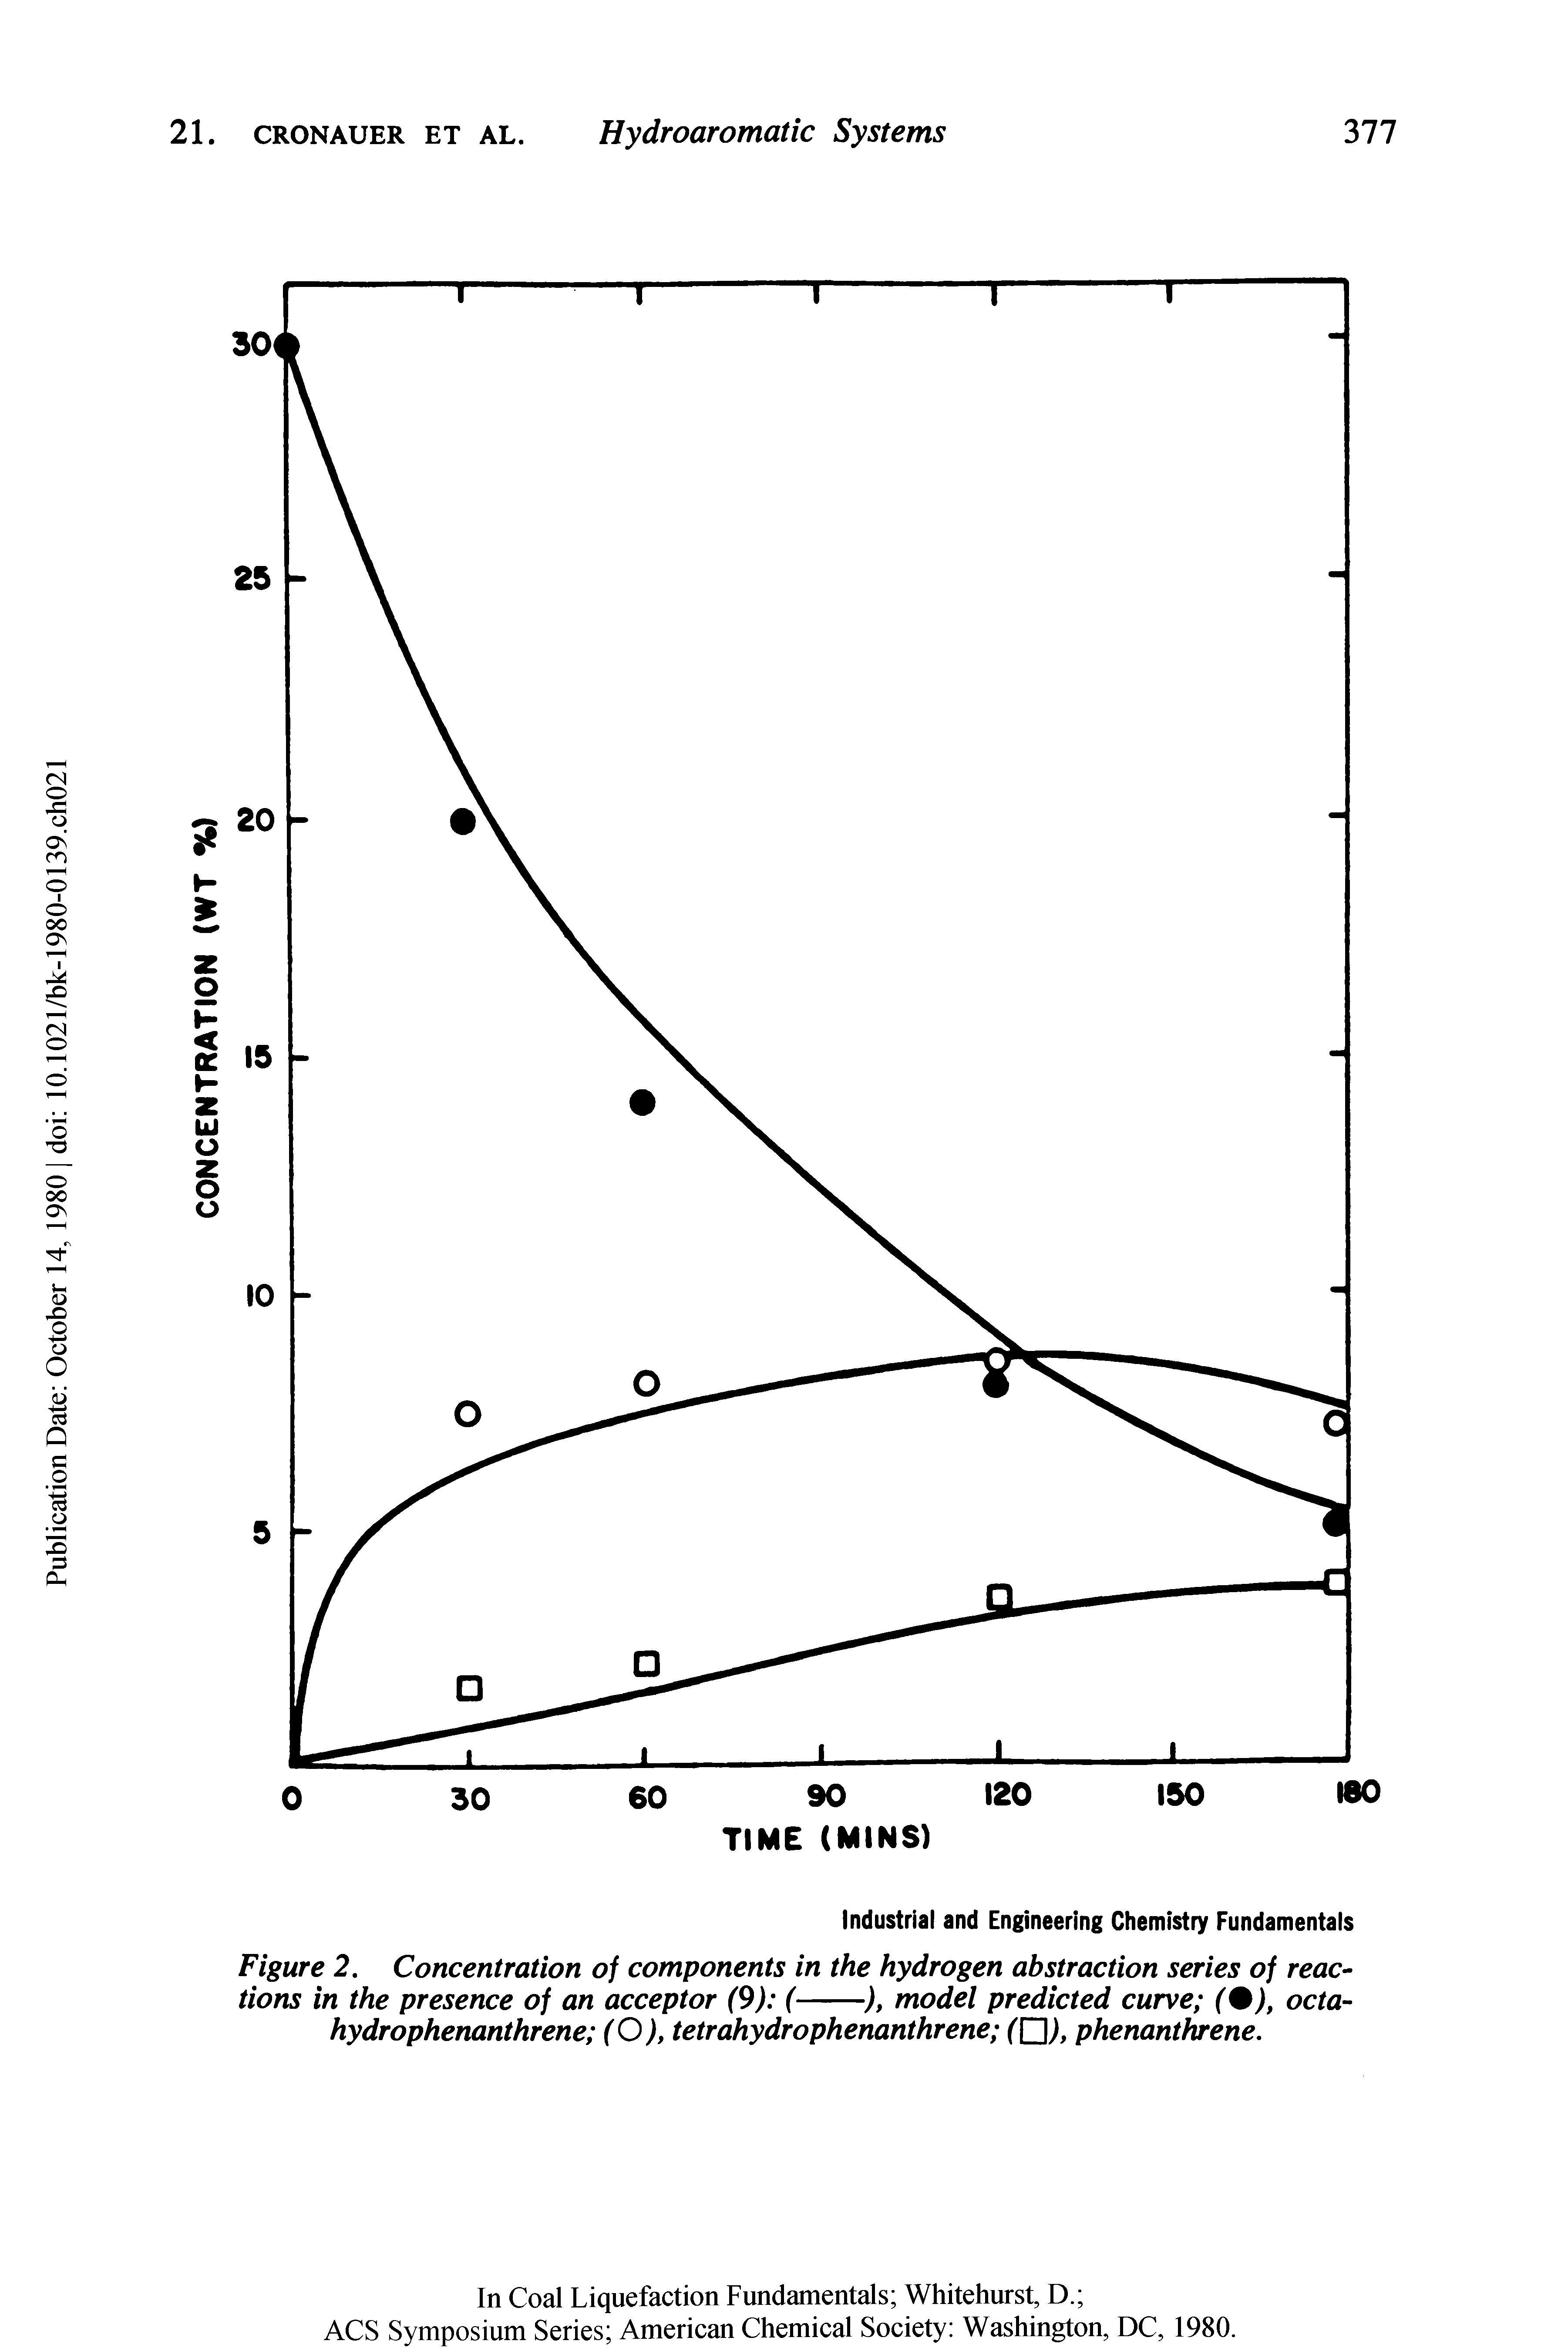 Figure 2. Concentration of components in the hydrogen abstraction series of reactions in the presence of an acceptor (9) (---), model predicted curve (9), octa-...